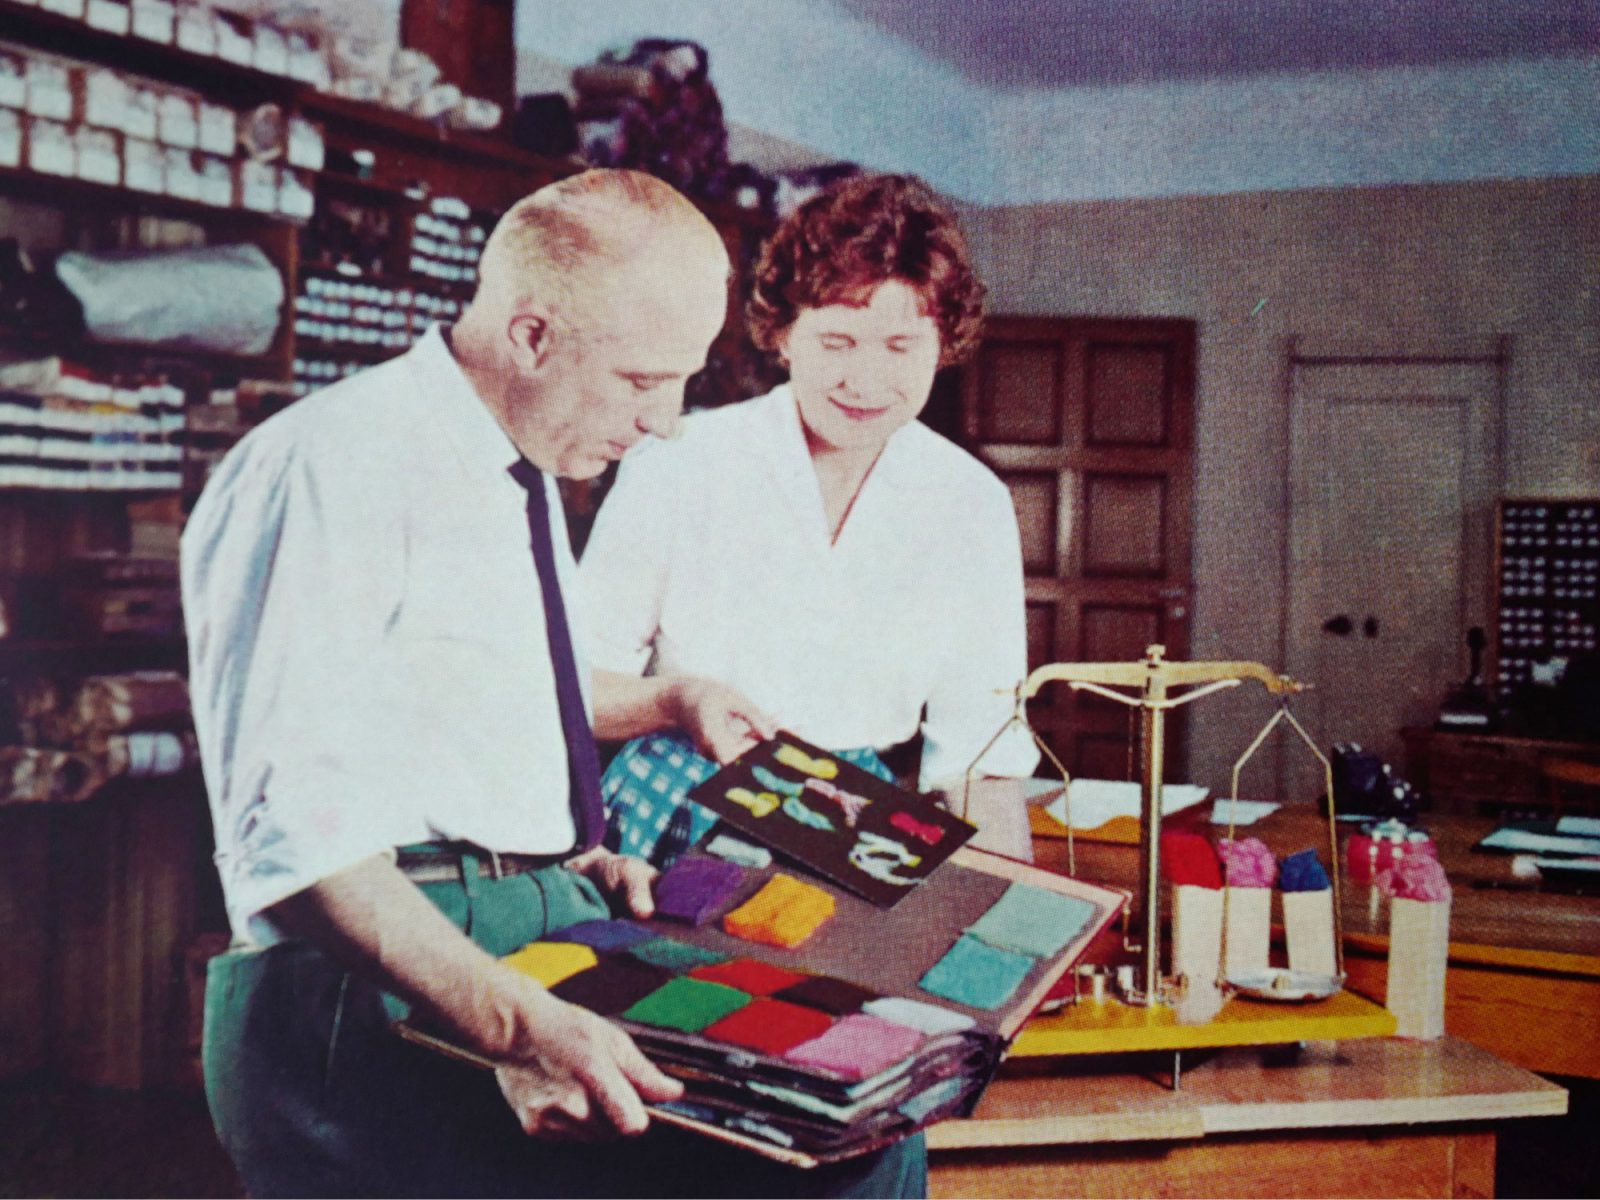 Woman and man, both wearing white shirts, looking at fabric samples in a textile showroom.